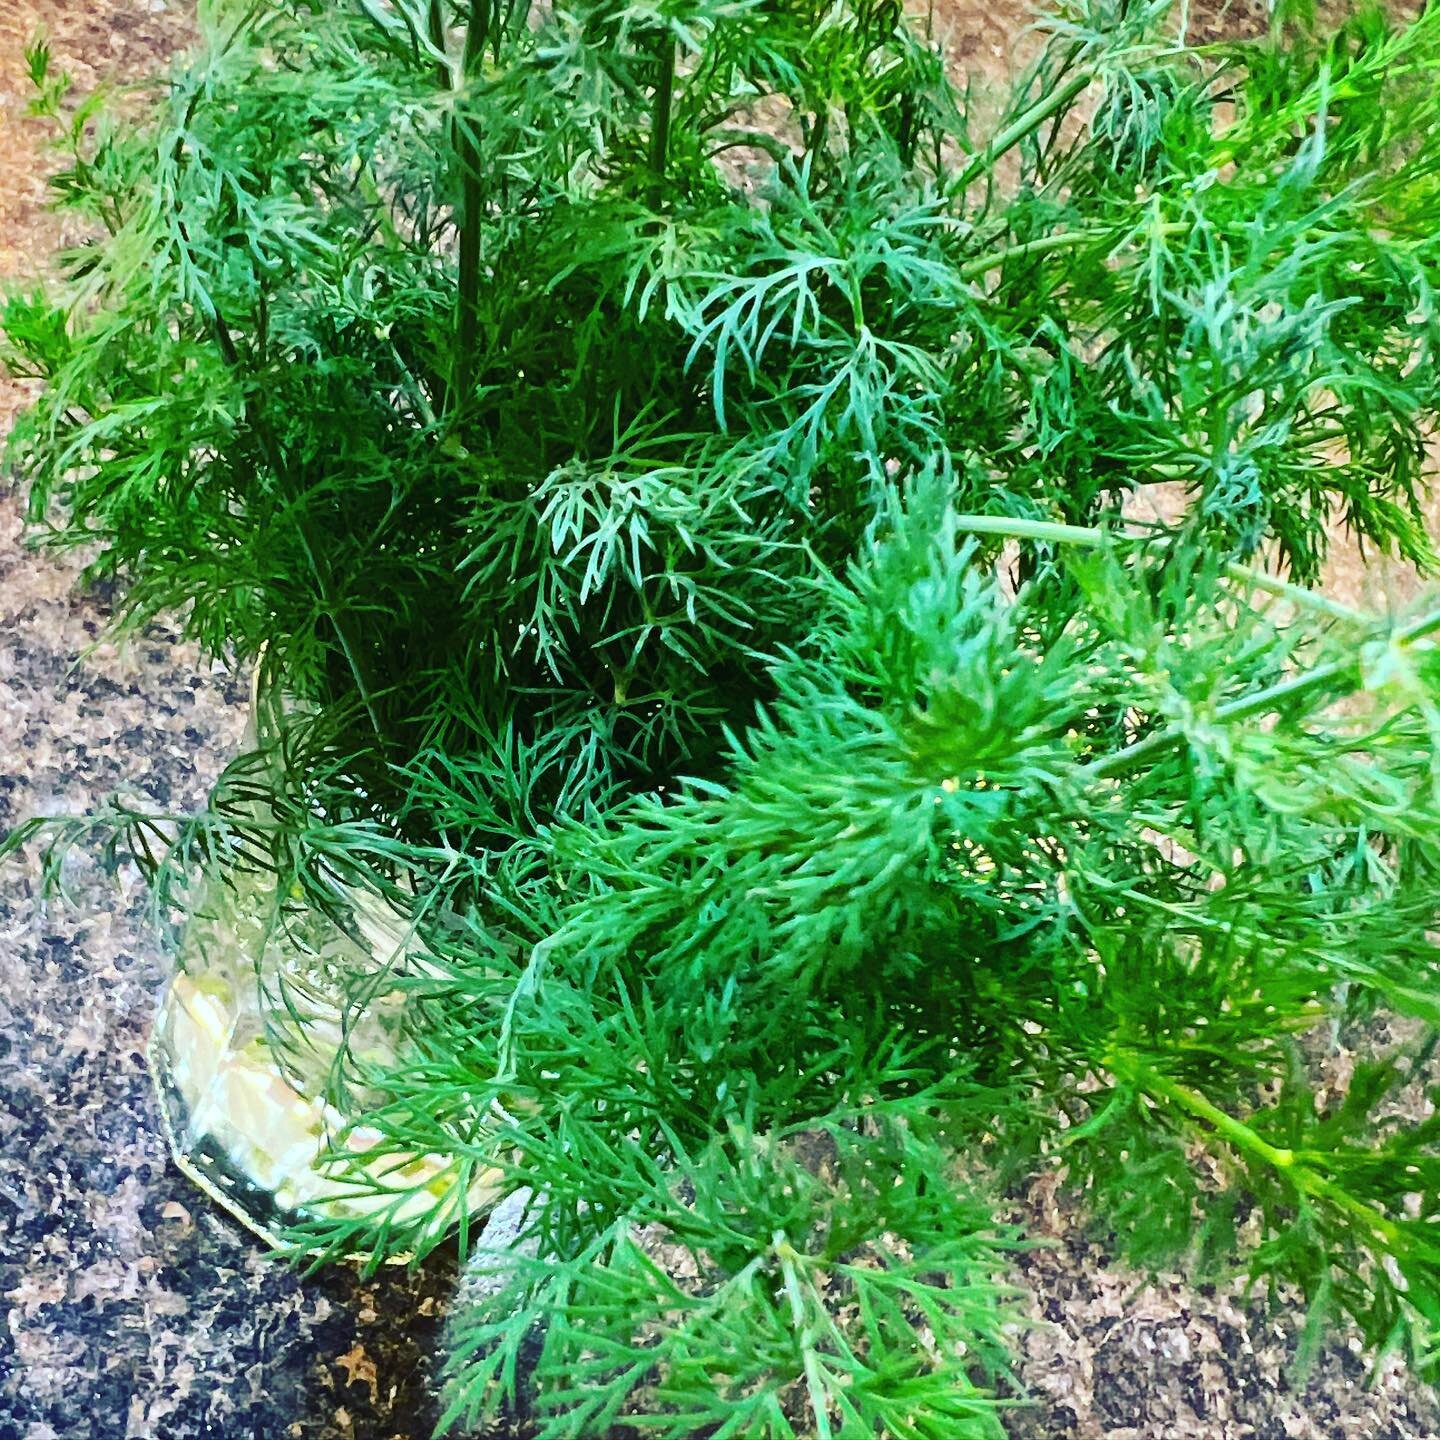 Herbs! Not only can they pack a powerful flavor punch but they can also add valuable vitamins, minerals, and antioxidants! And if you need any dill, just let JKB know... she's been growing lots in her @aerogarden and can barely keep up! 

What are yo